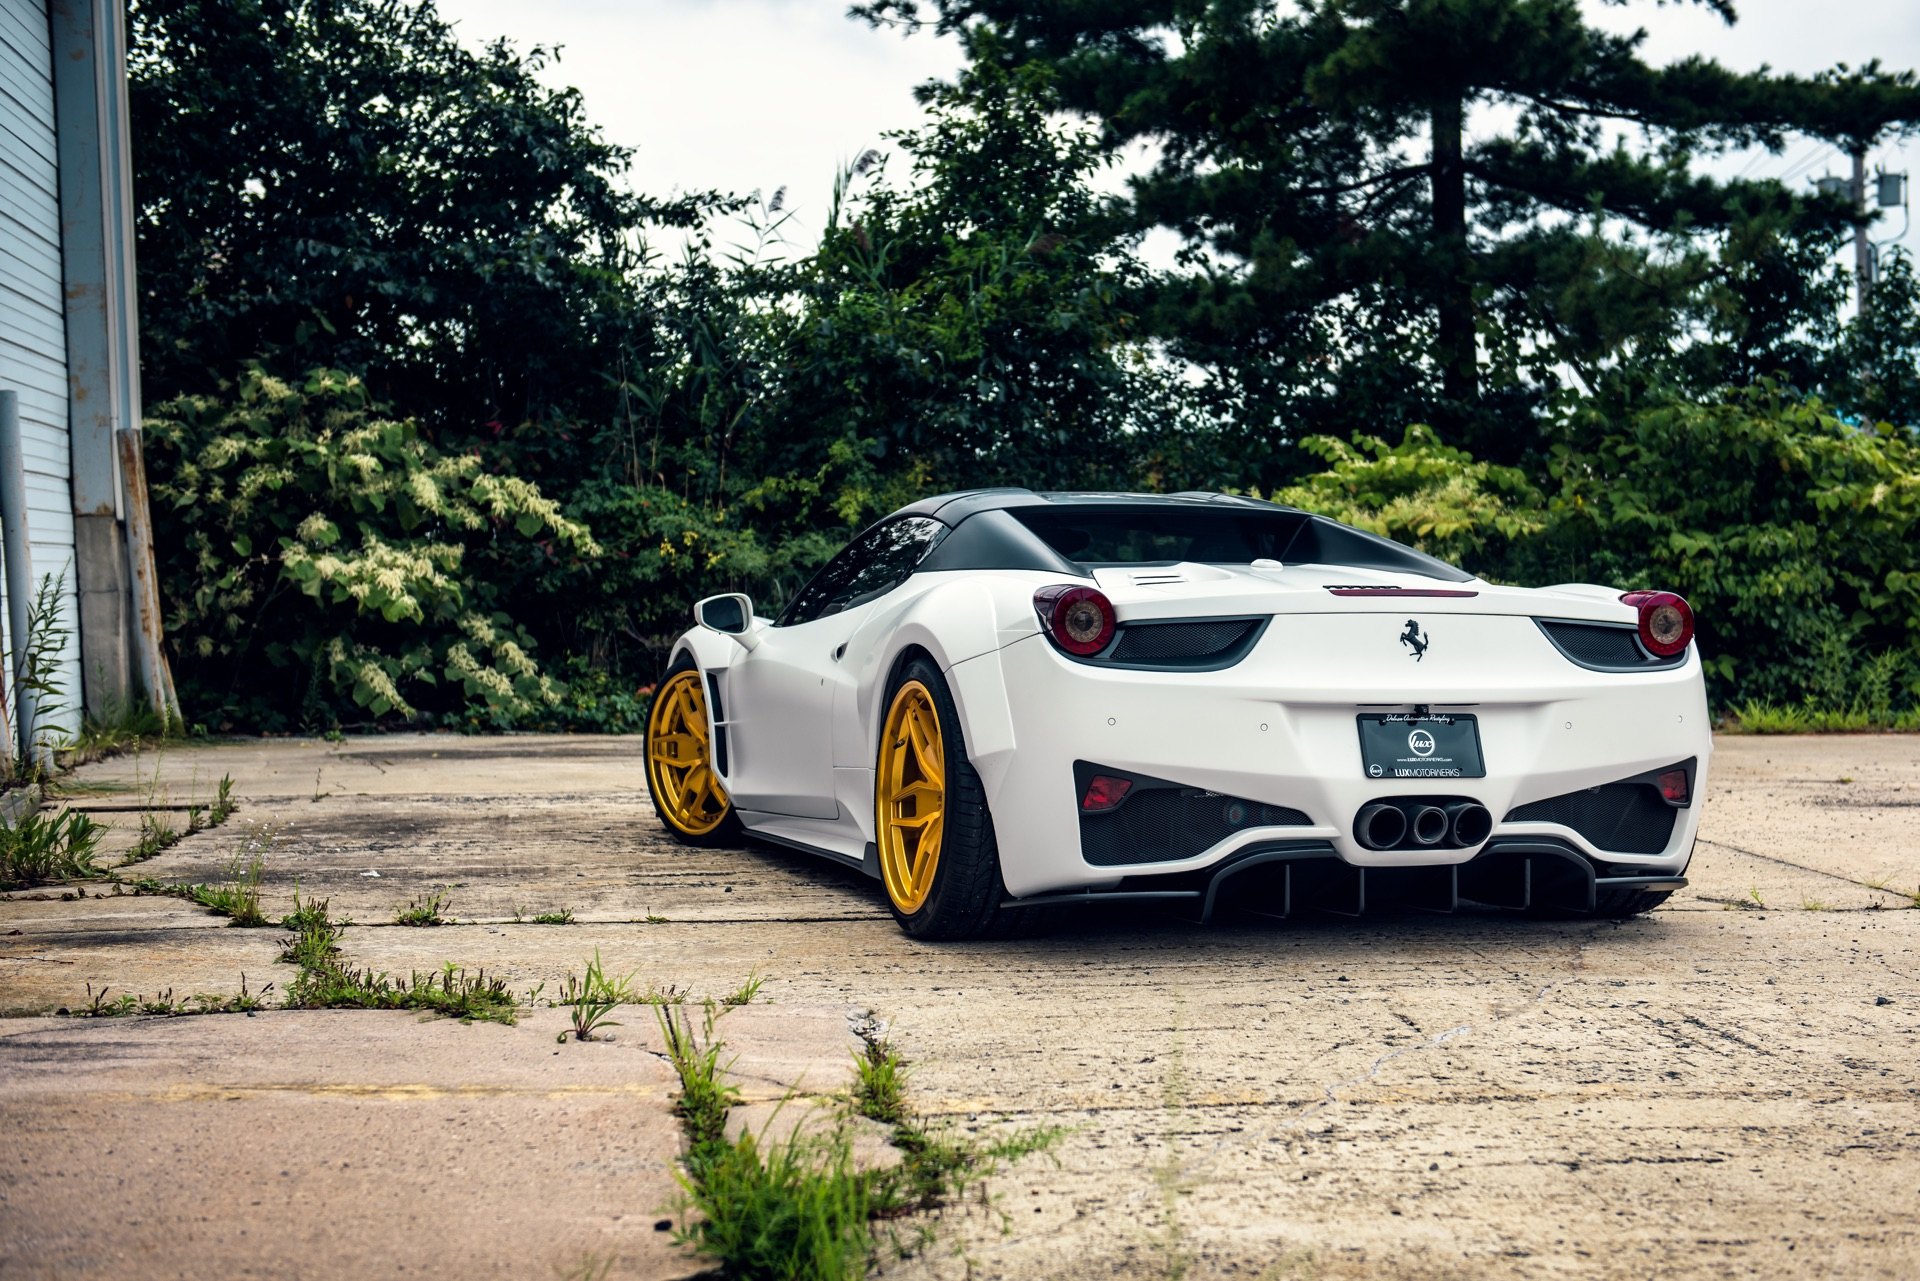 White Convertible Ferrari 458 with Aftermarket Rear Diffuser - Photo by DUB Magazine